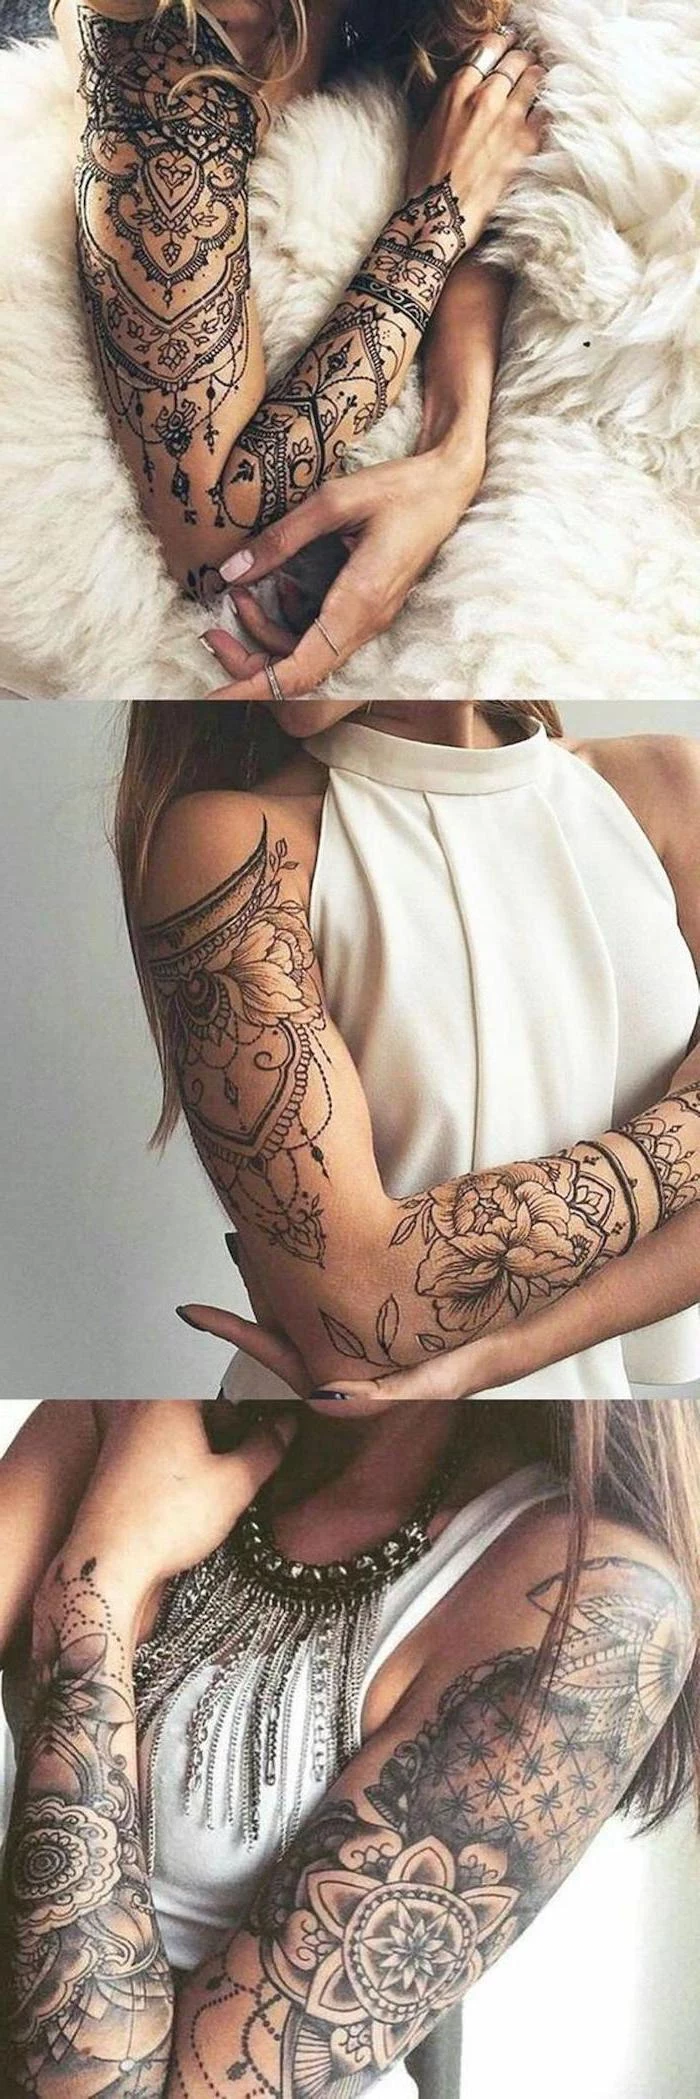 sleeve tattoos, white top, side by side photos, mandala tattoo meaning